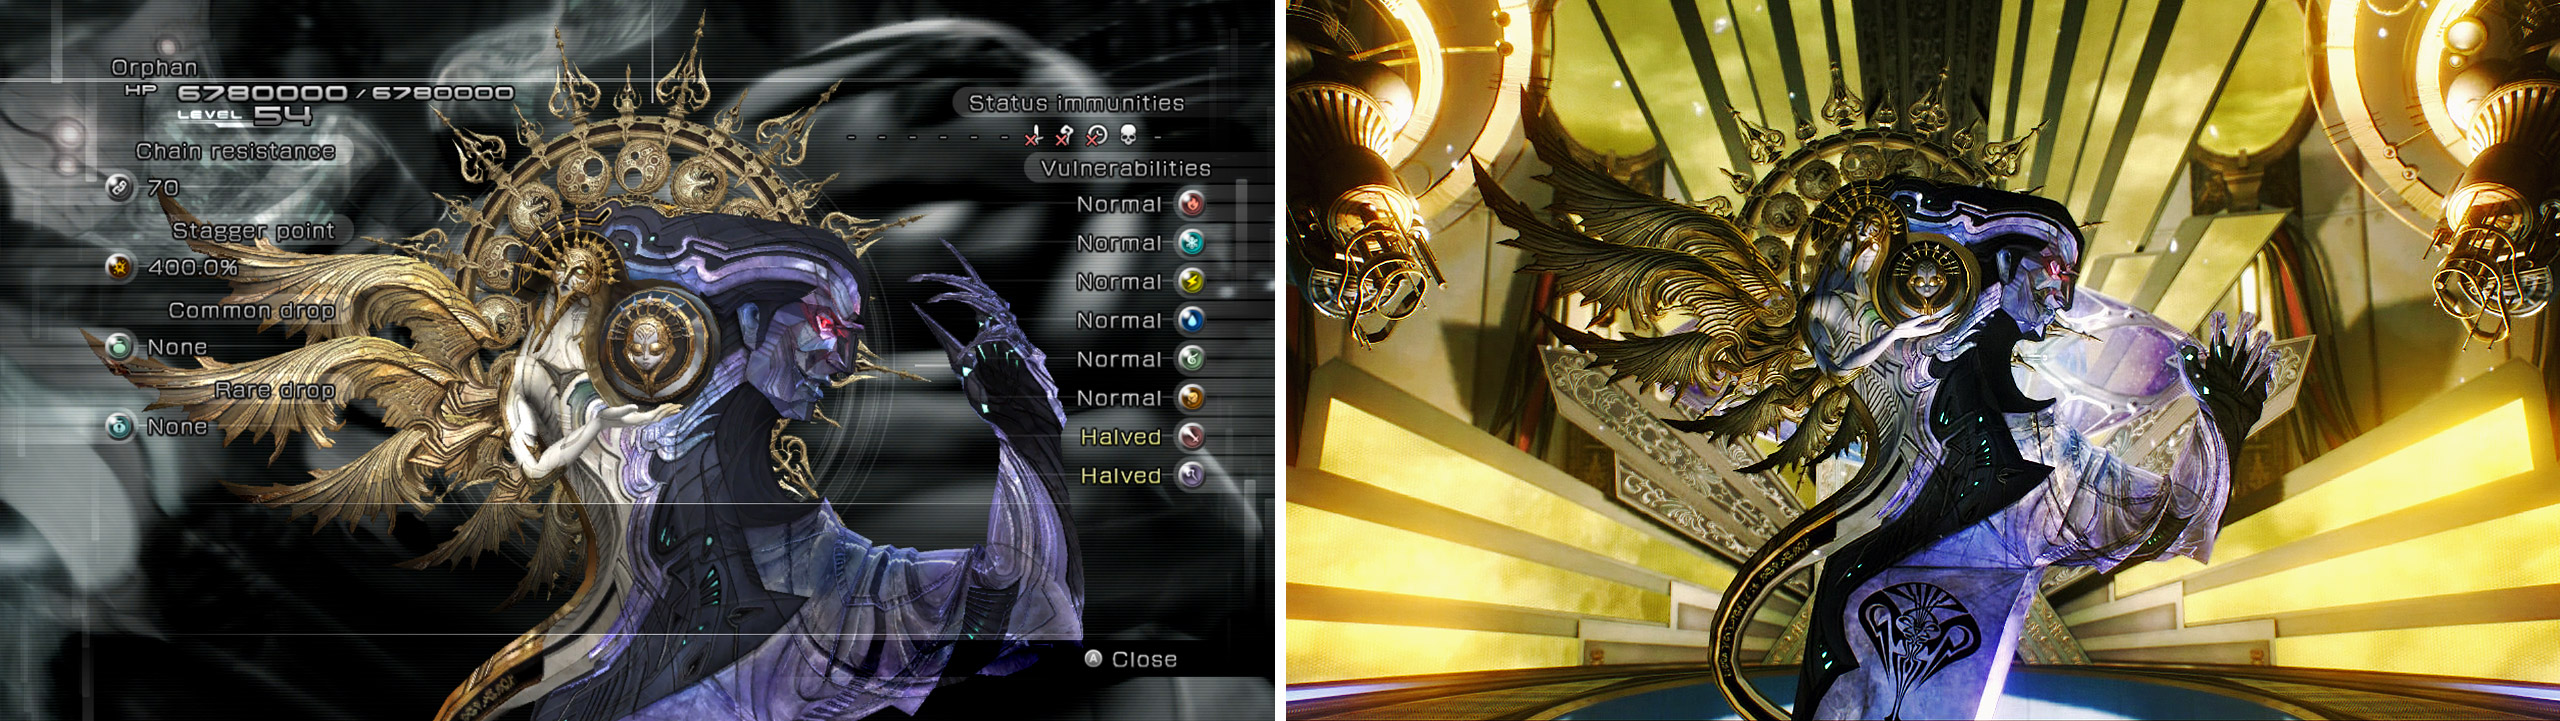 The first form of Orphan is the penultimate boss of Final Fantasy XIII. After Barthandelus is defeated, Orphan’s shell emerges from the inky fluid and attacks the party.